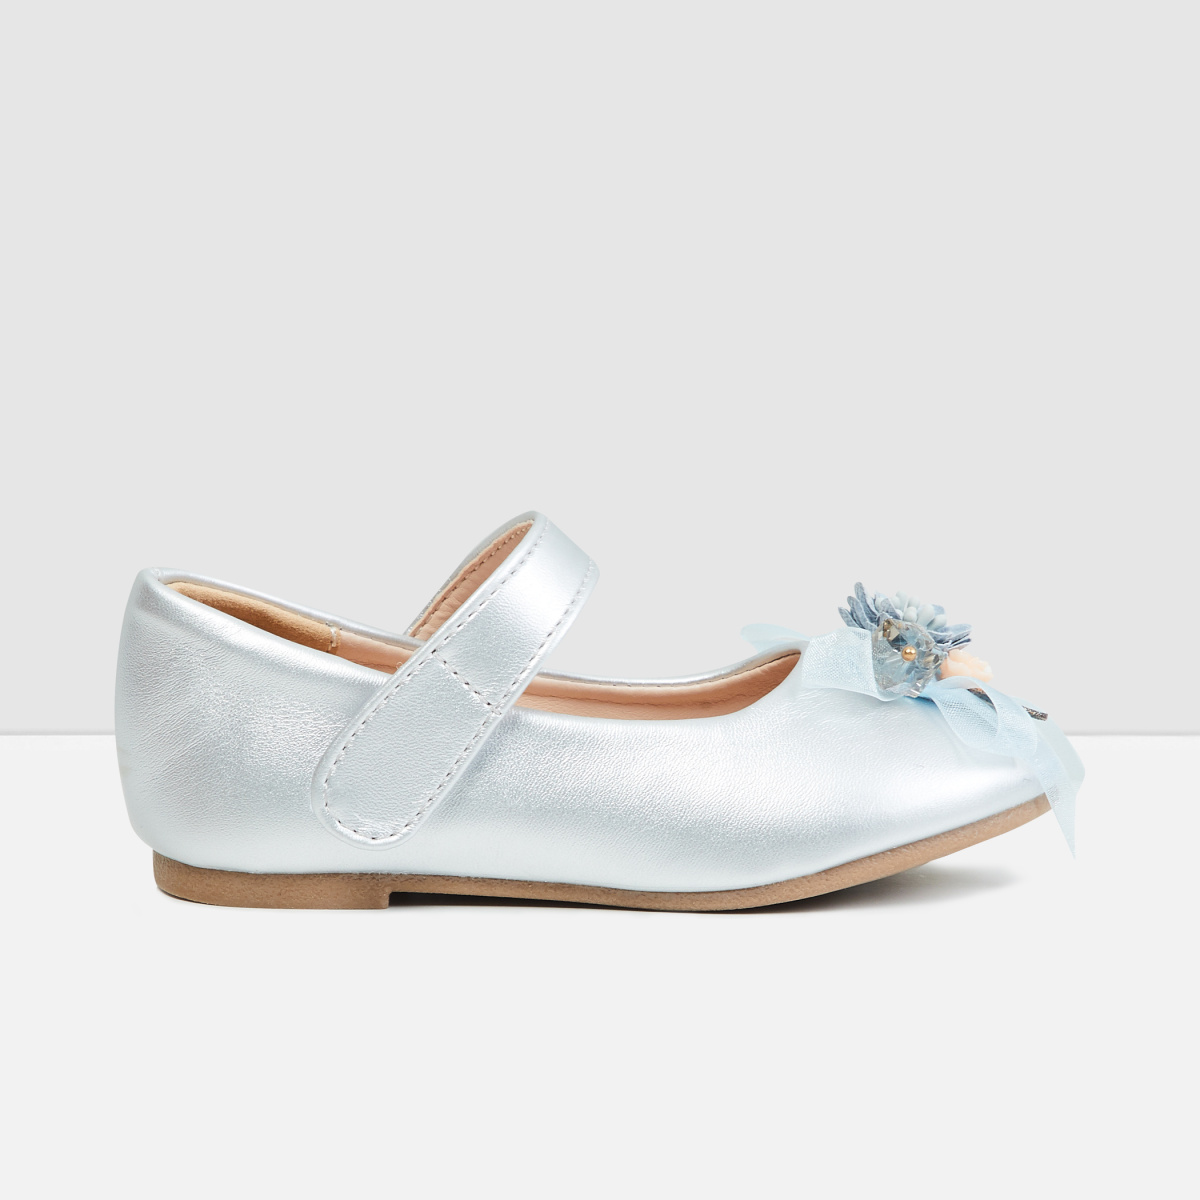 MAX Embellished Mary Janes